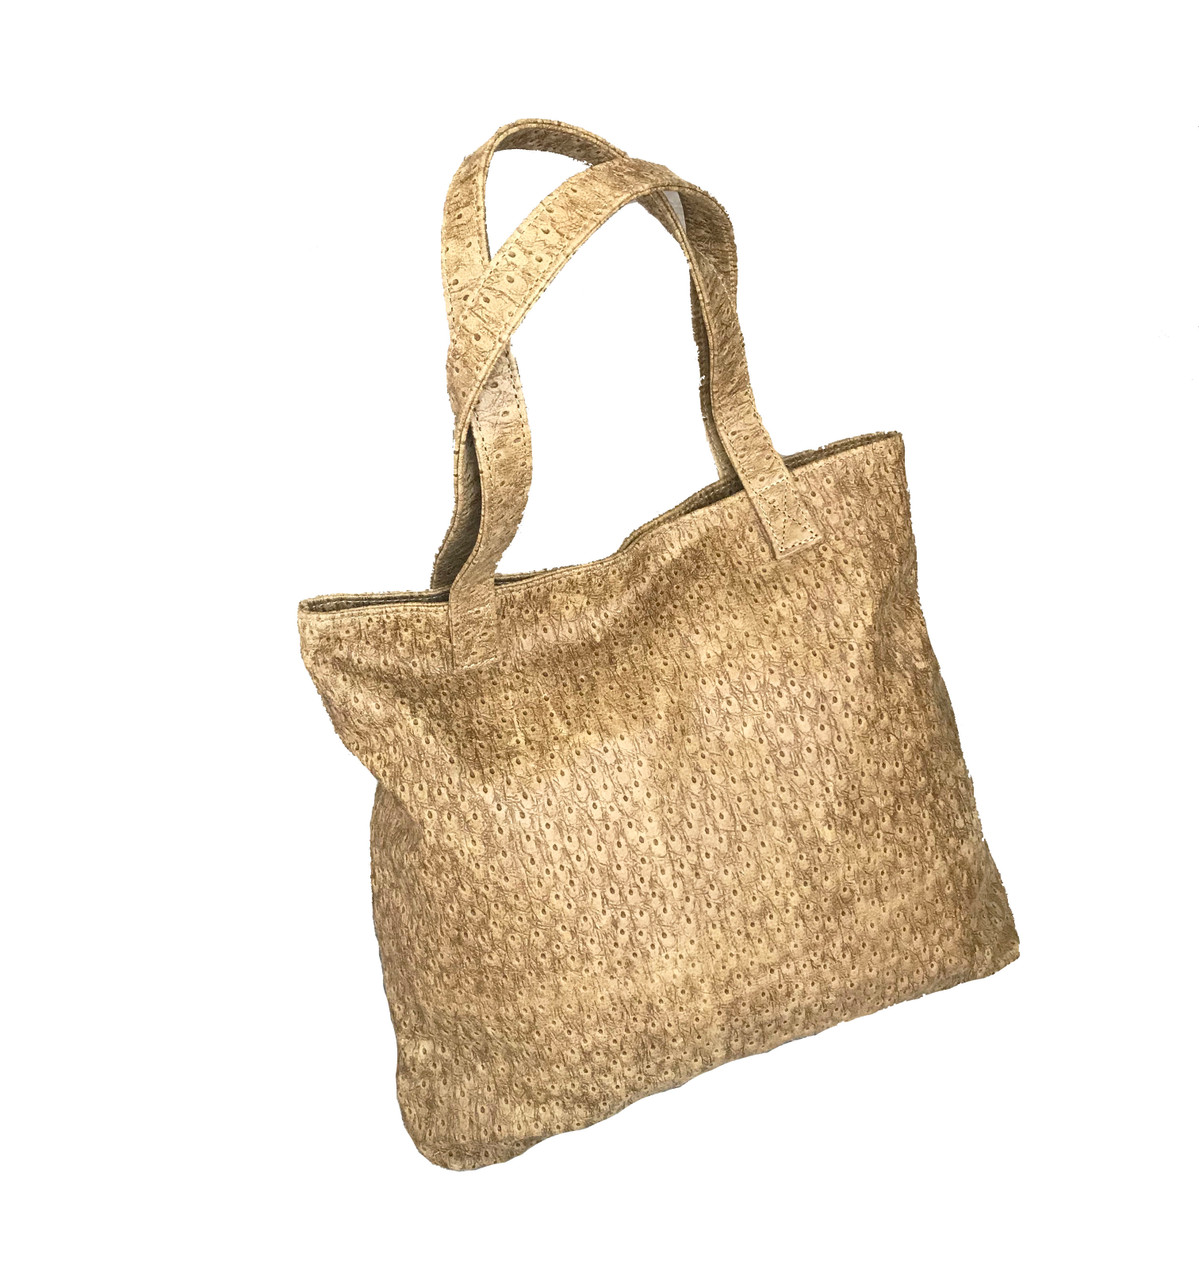 All Bags & Accessories, Leather & Jute Bags